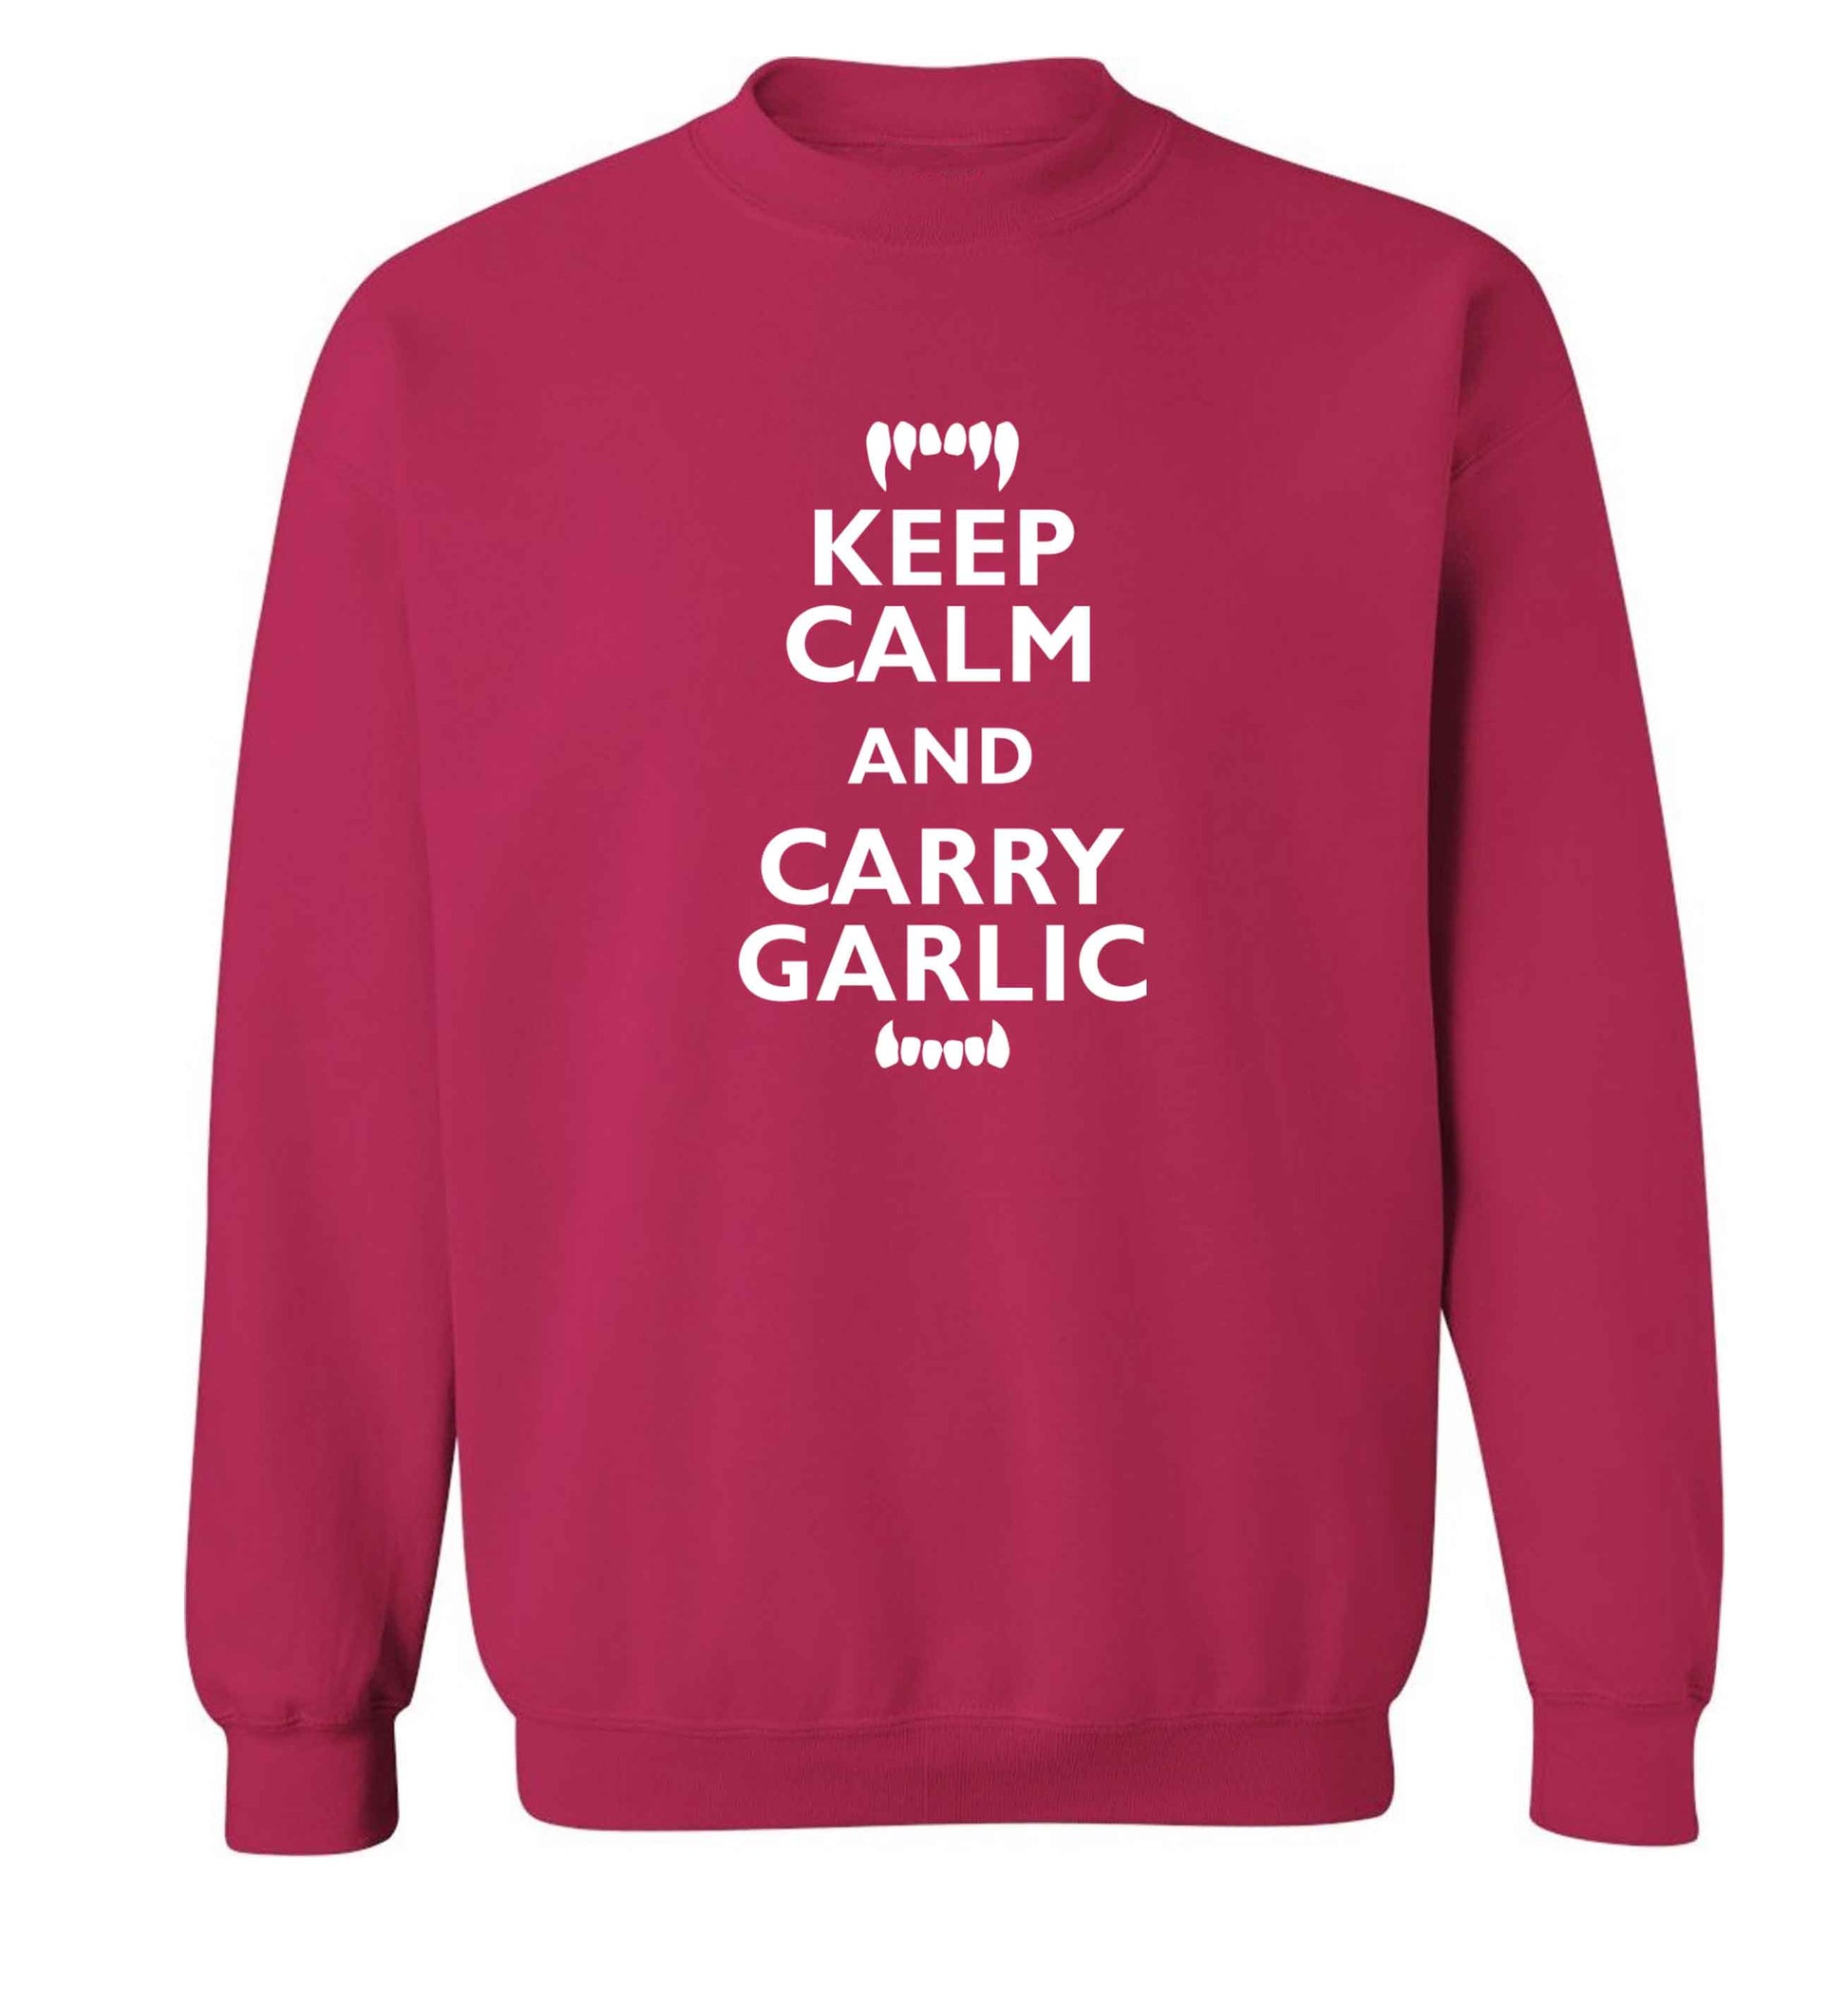 Keep calm and carry garlic adult's unisex pink sweater 2XL